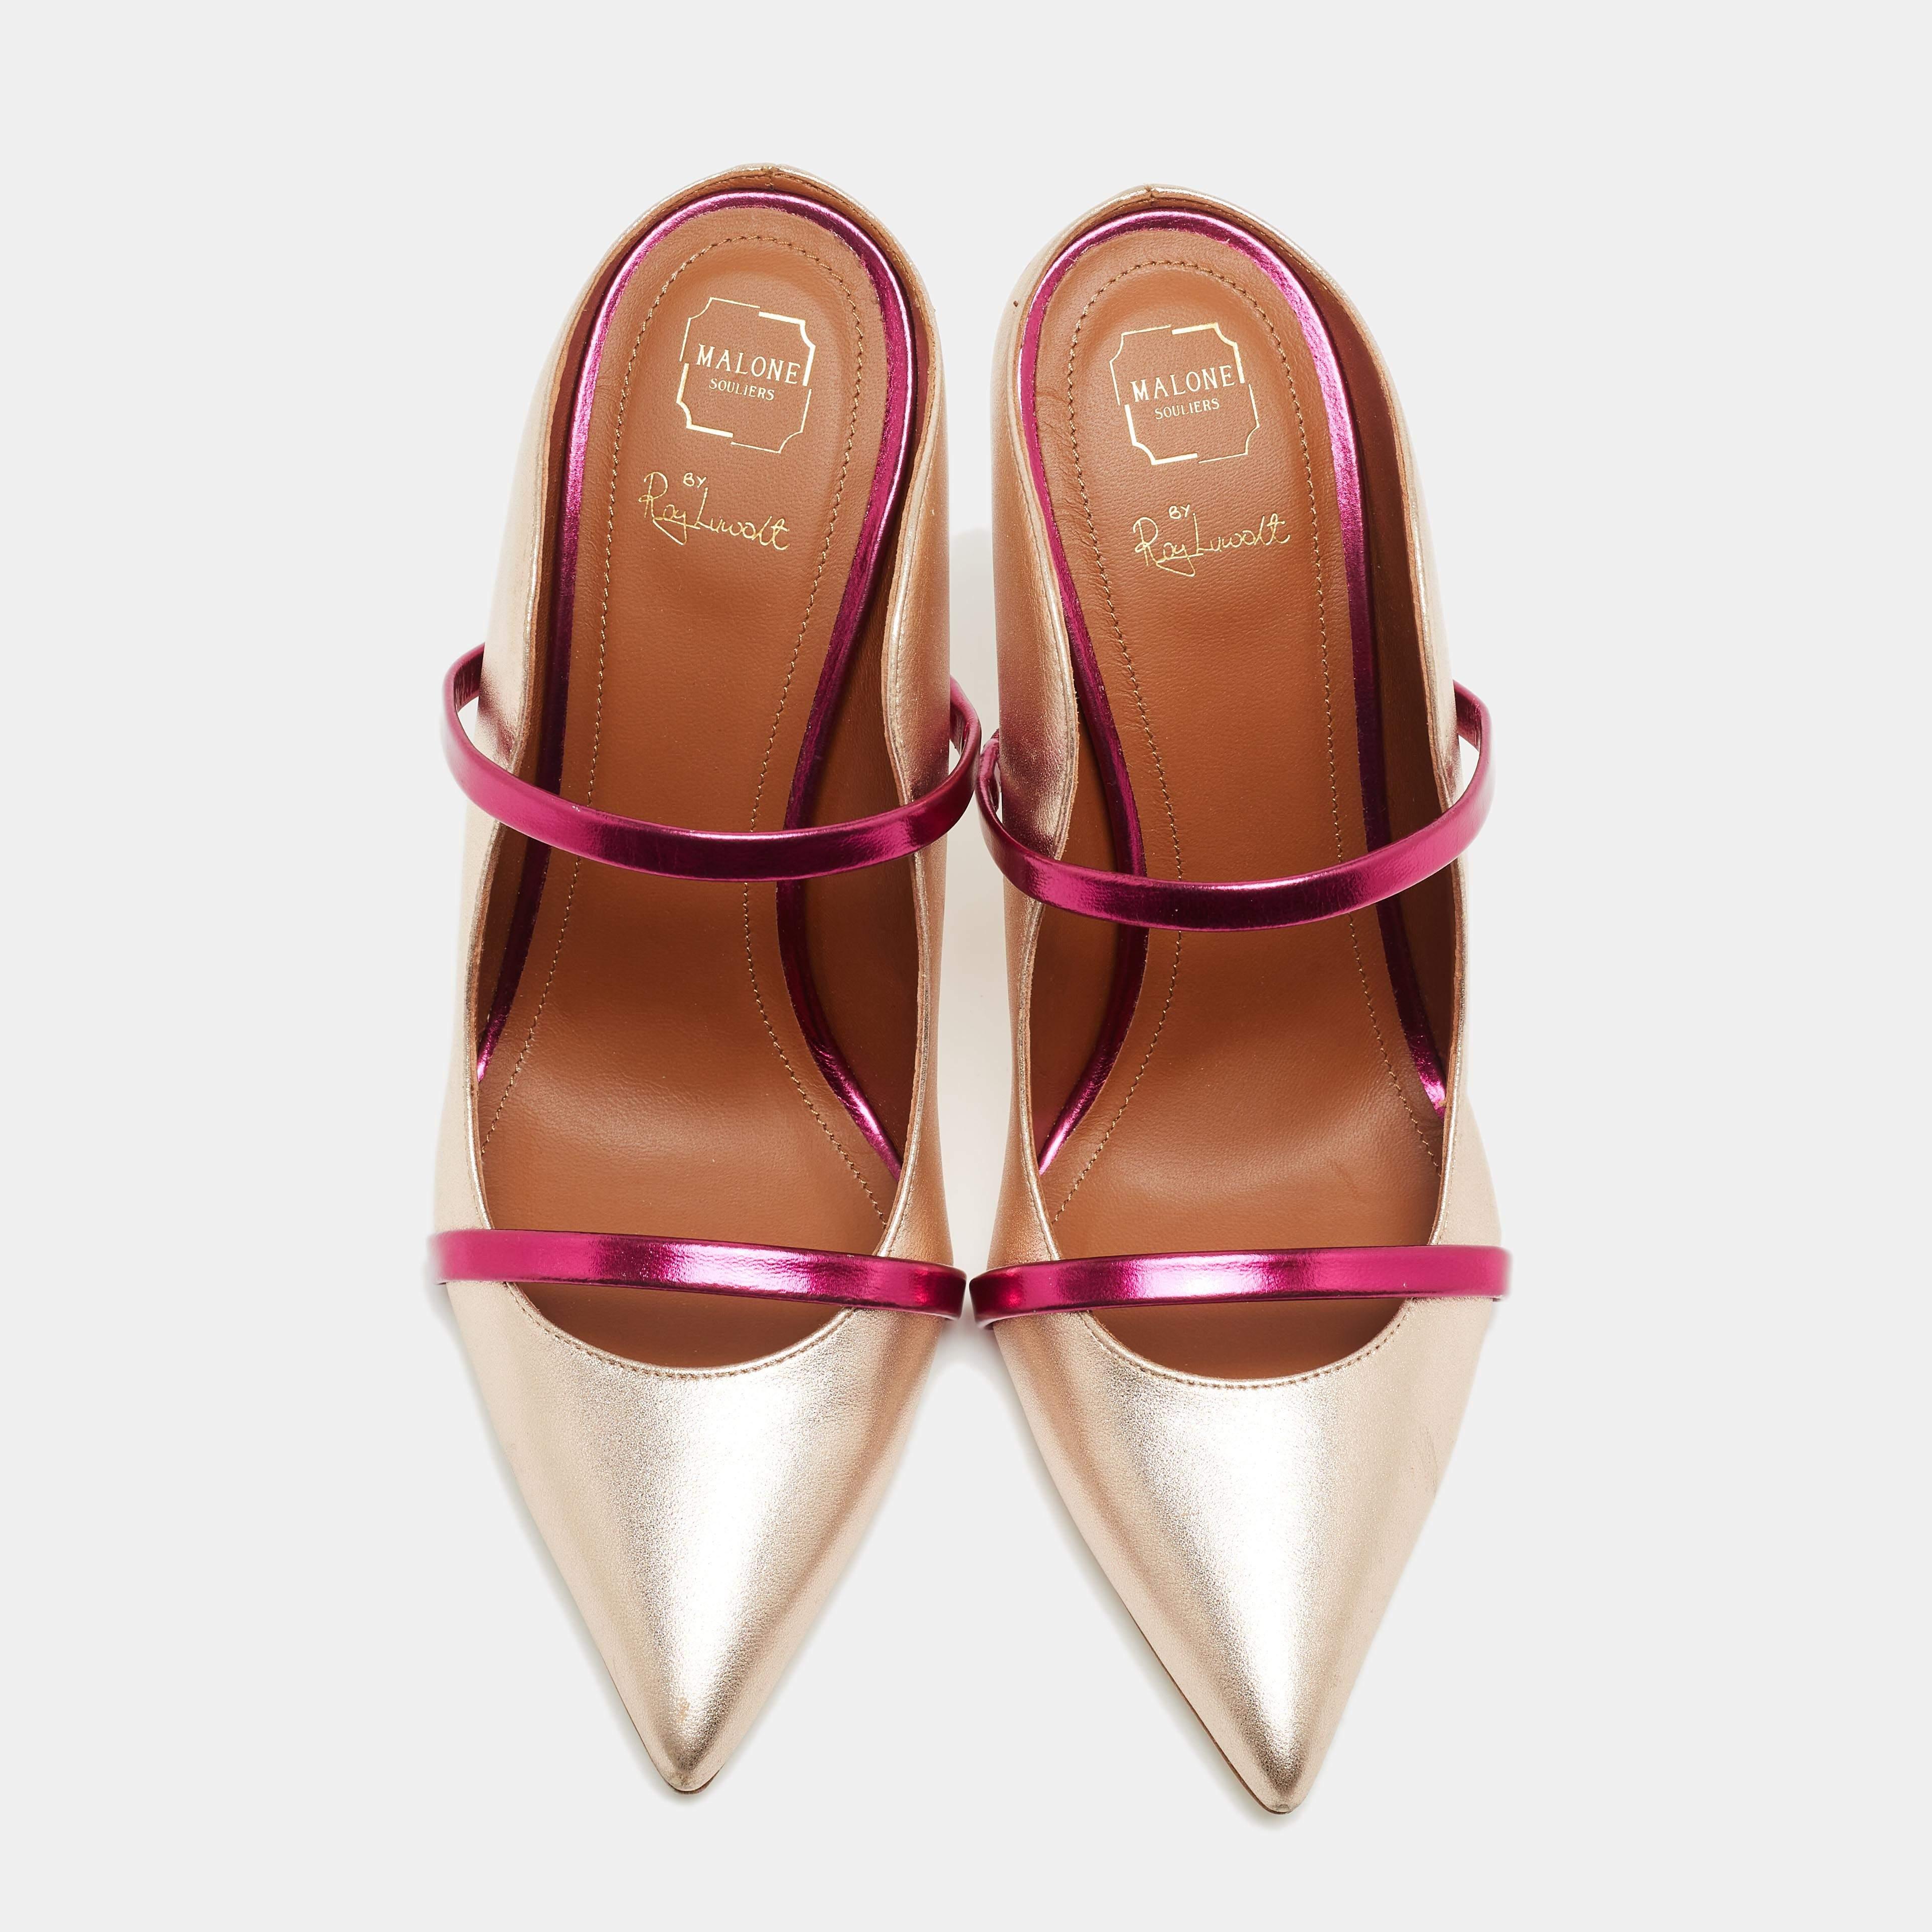 These iconic Maureen flats are not only graceful and chic but also highly comfortable. Crafted from rose gold foil leather, the strap highlights the shape of your feet. The pointed-toe silhouette completes these stunning flats so that you can flaunt